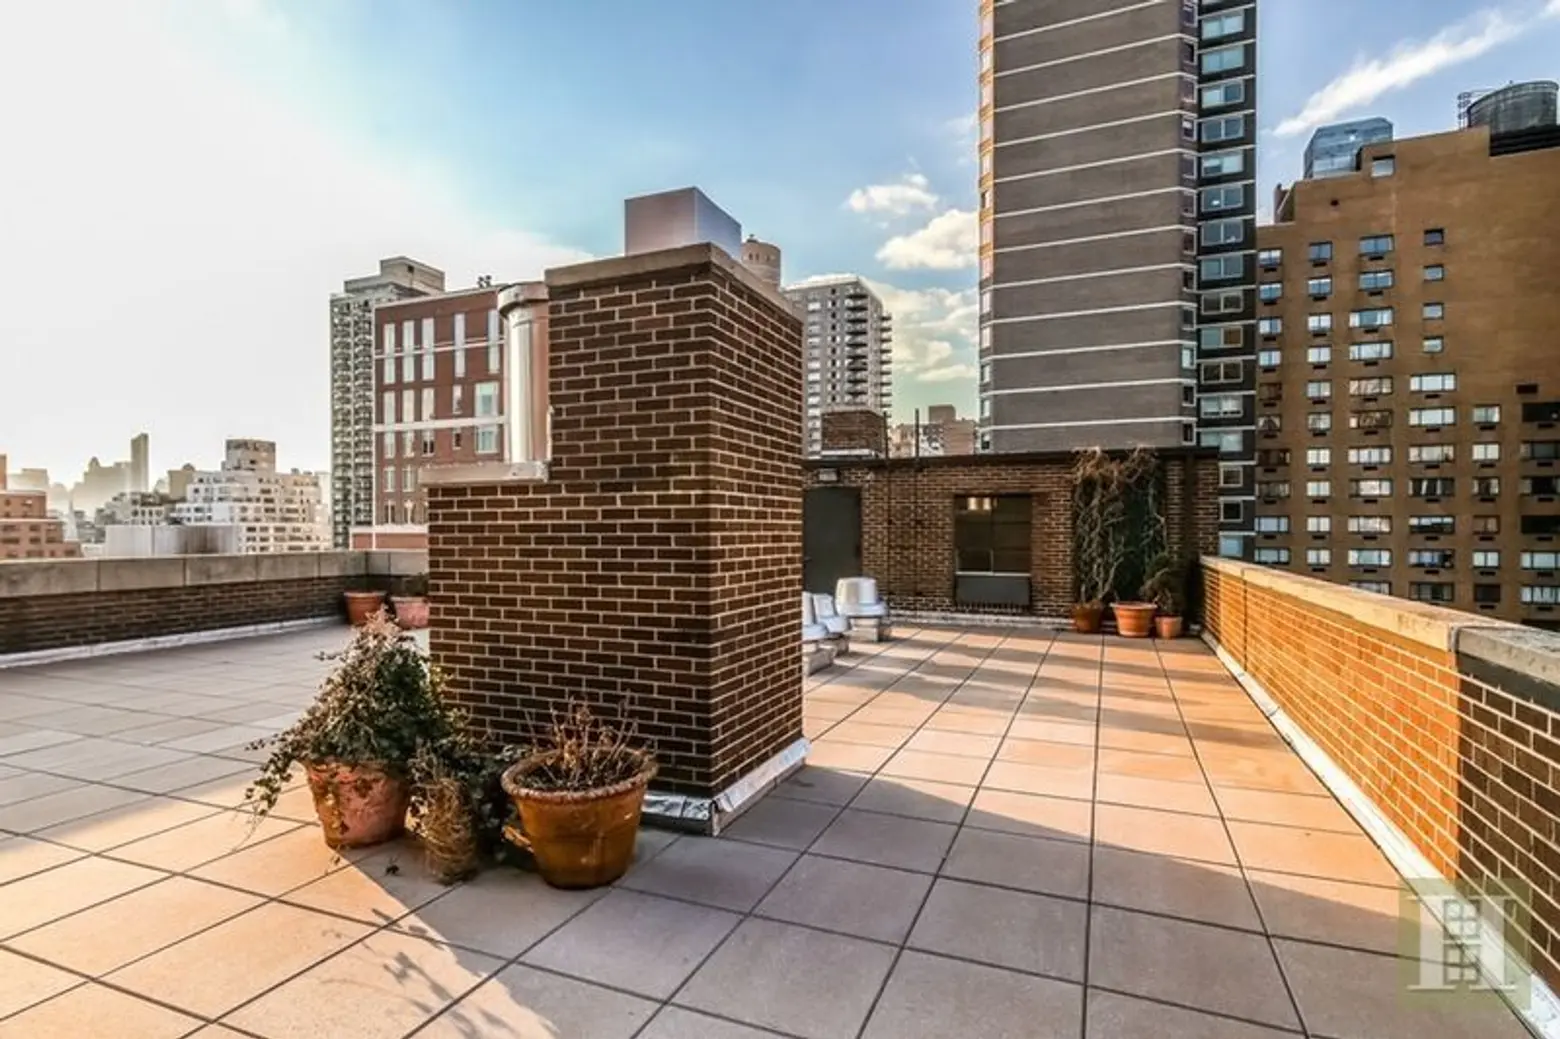 225 East 86th Street, Cool listings, Upper East Side, Yorkville, triplexes, lofts, interiors, rustic, country cottage in the city